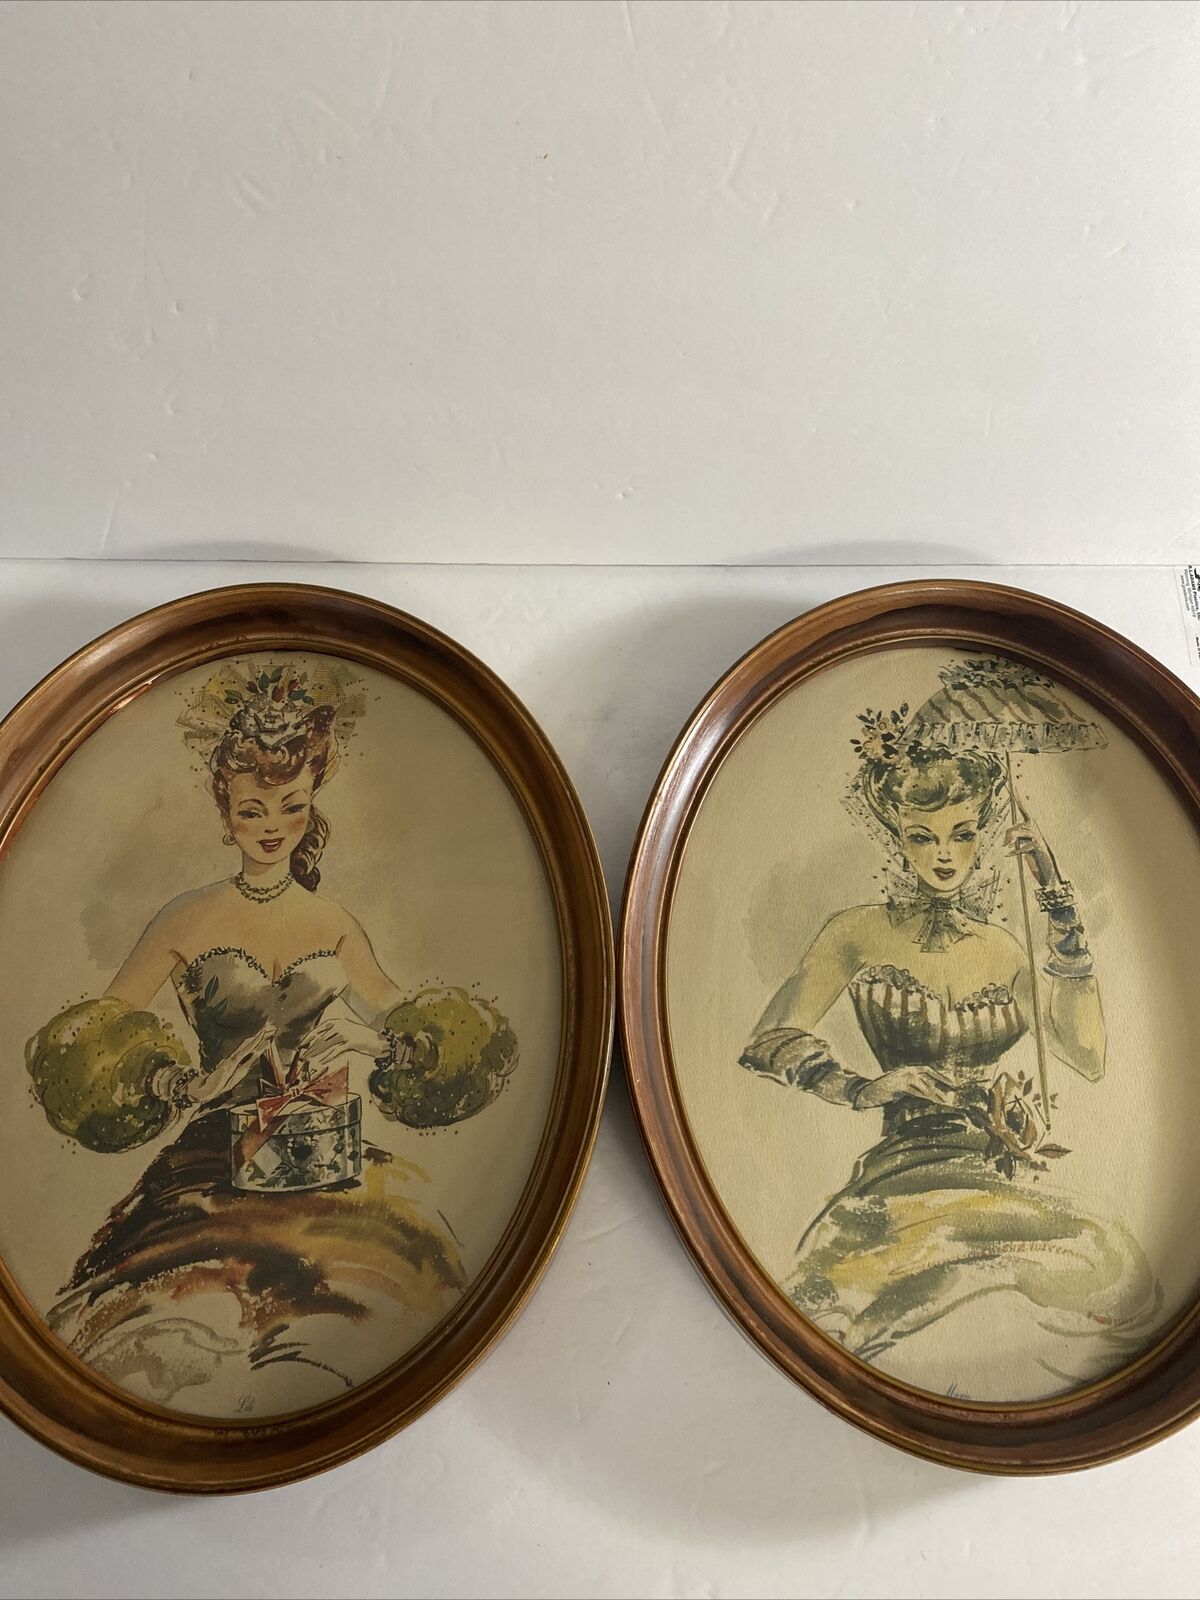 2 BEAUTIFUL VINTAGE VICTORIAN WATER COLORS PRINTS OF LADY IN OVAL FRAME